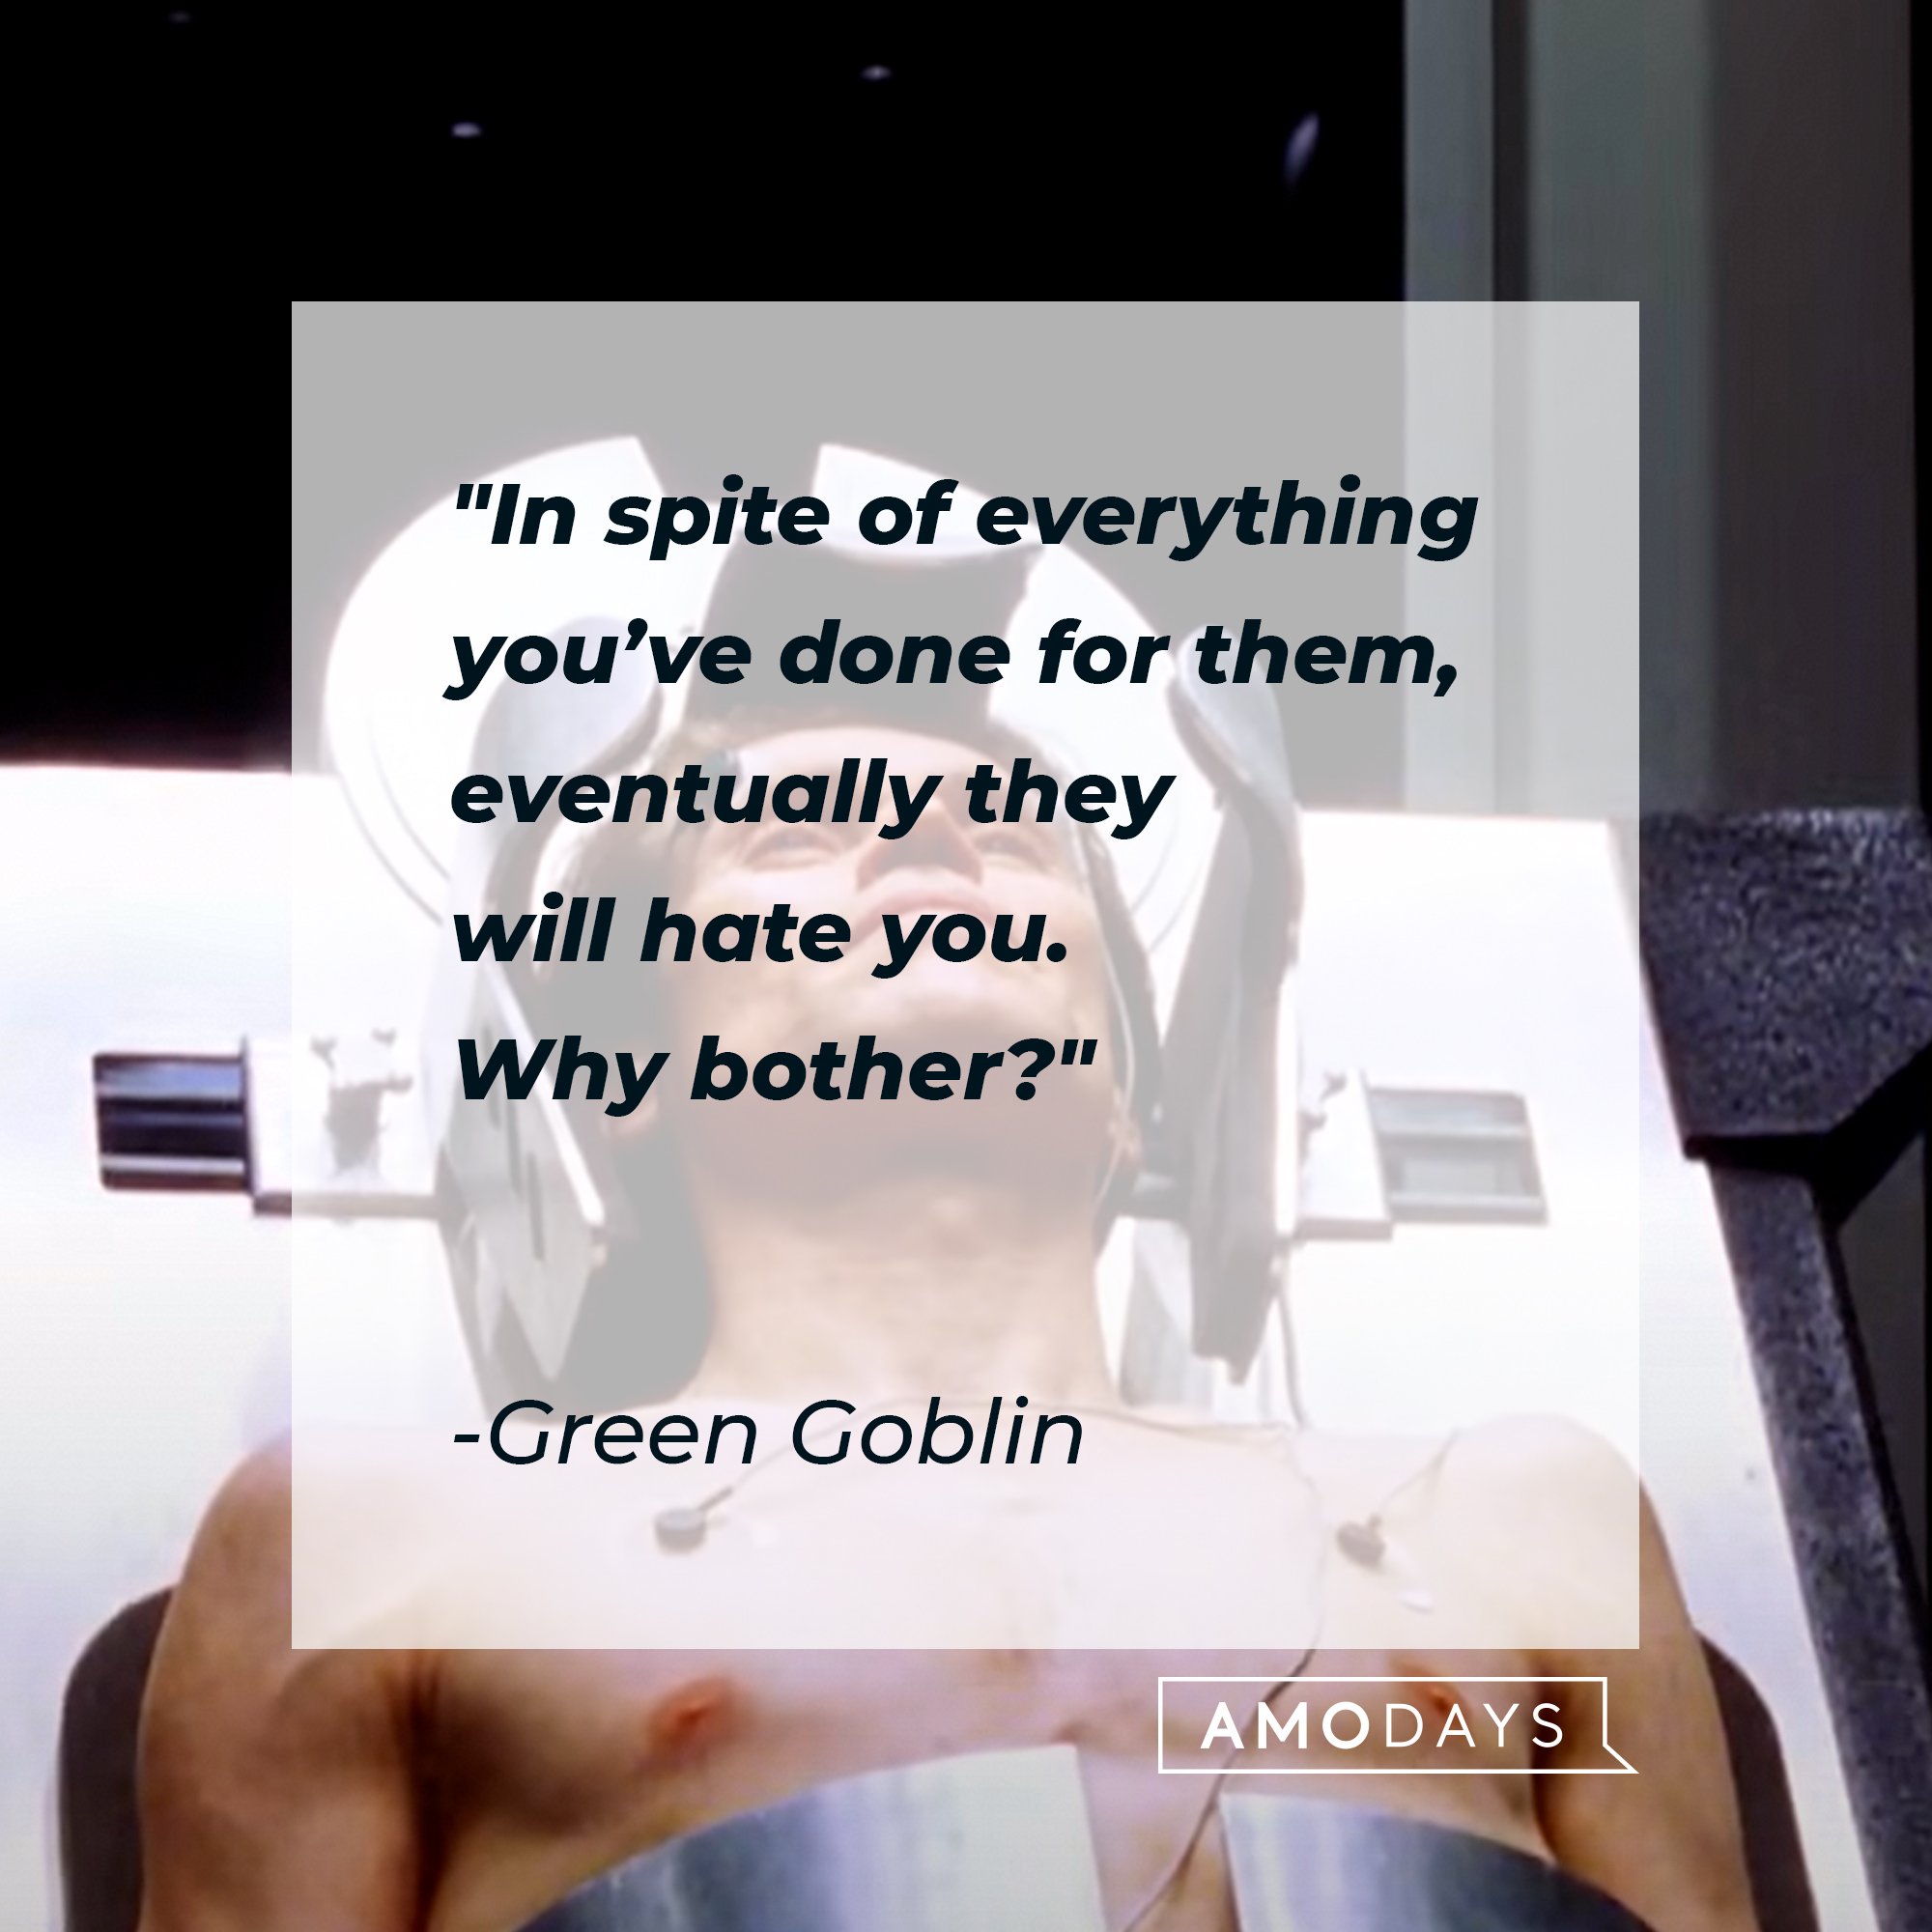 Green Goblin’s quote: "In spite of everything you’ve done for them, eventually they will hate you. Why bother?" | Image: AmoDays